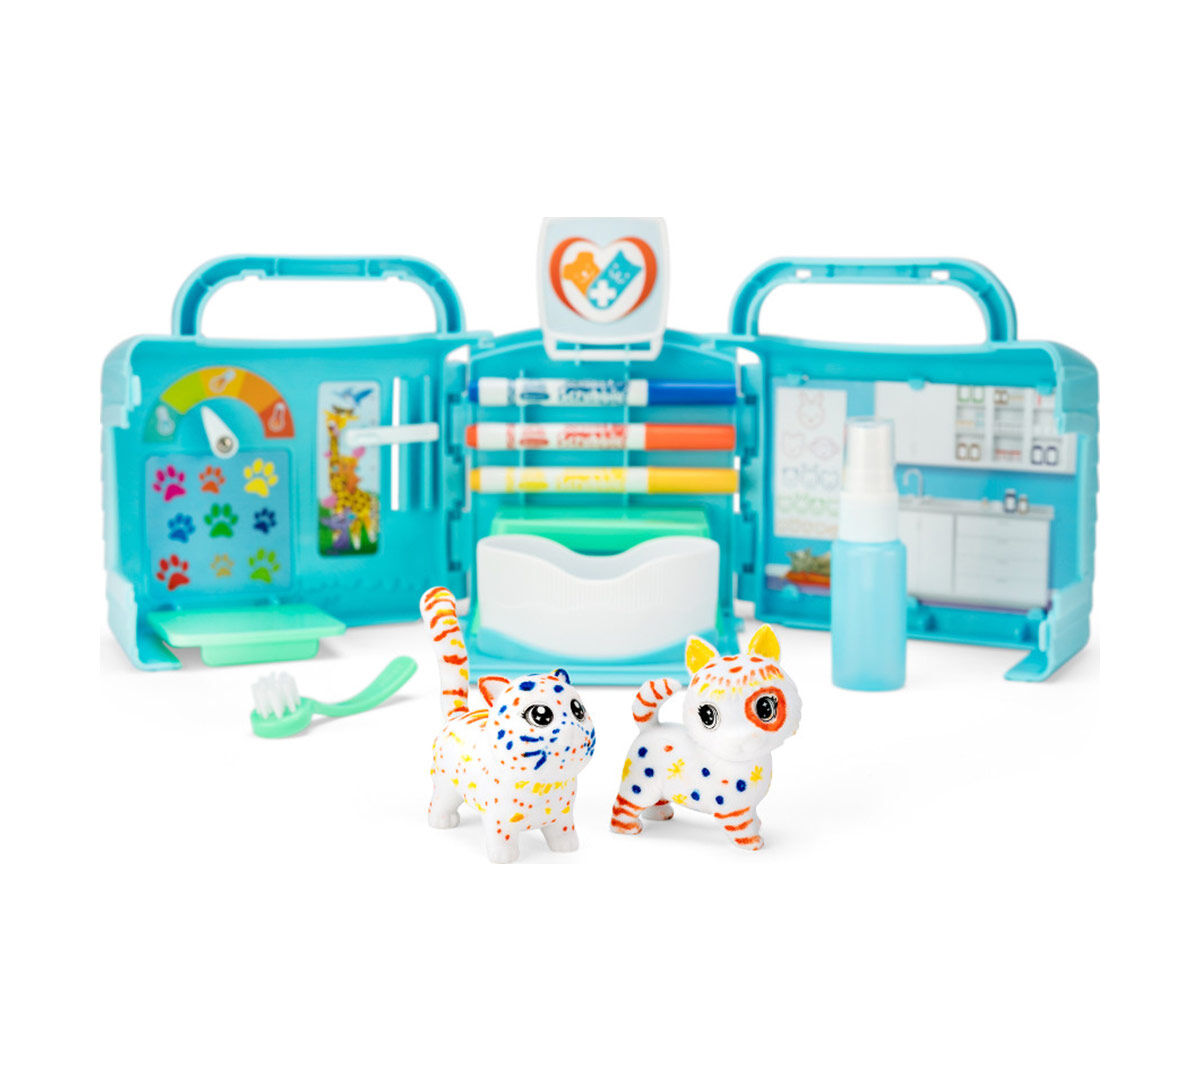 Vet Toy Playset with Toy Pets Gift for Kids, Crayola Scribble Scrubbie Pets 